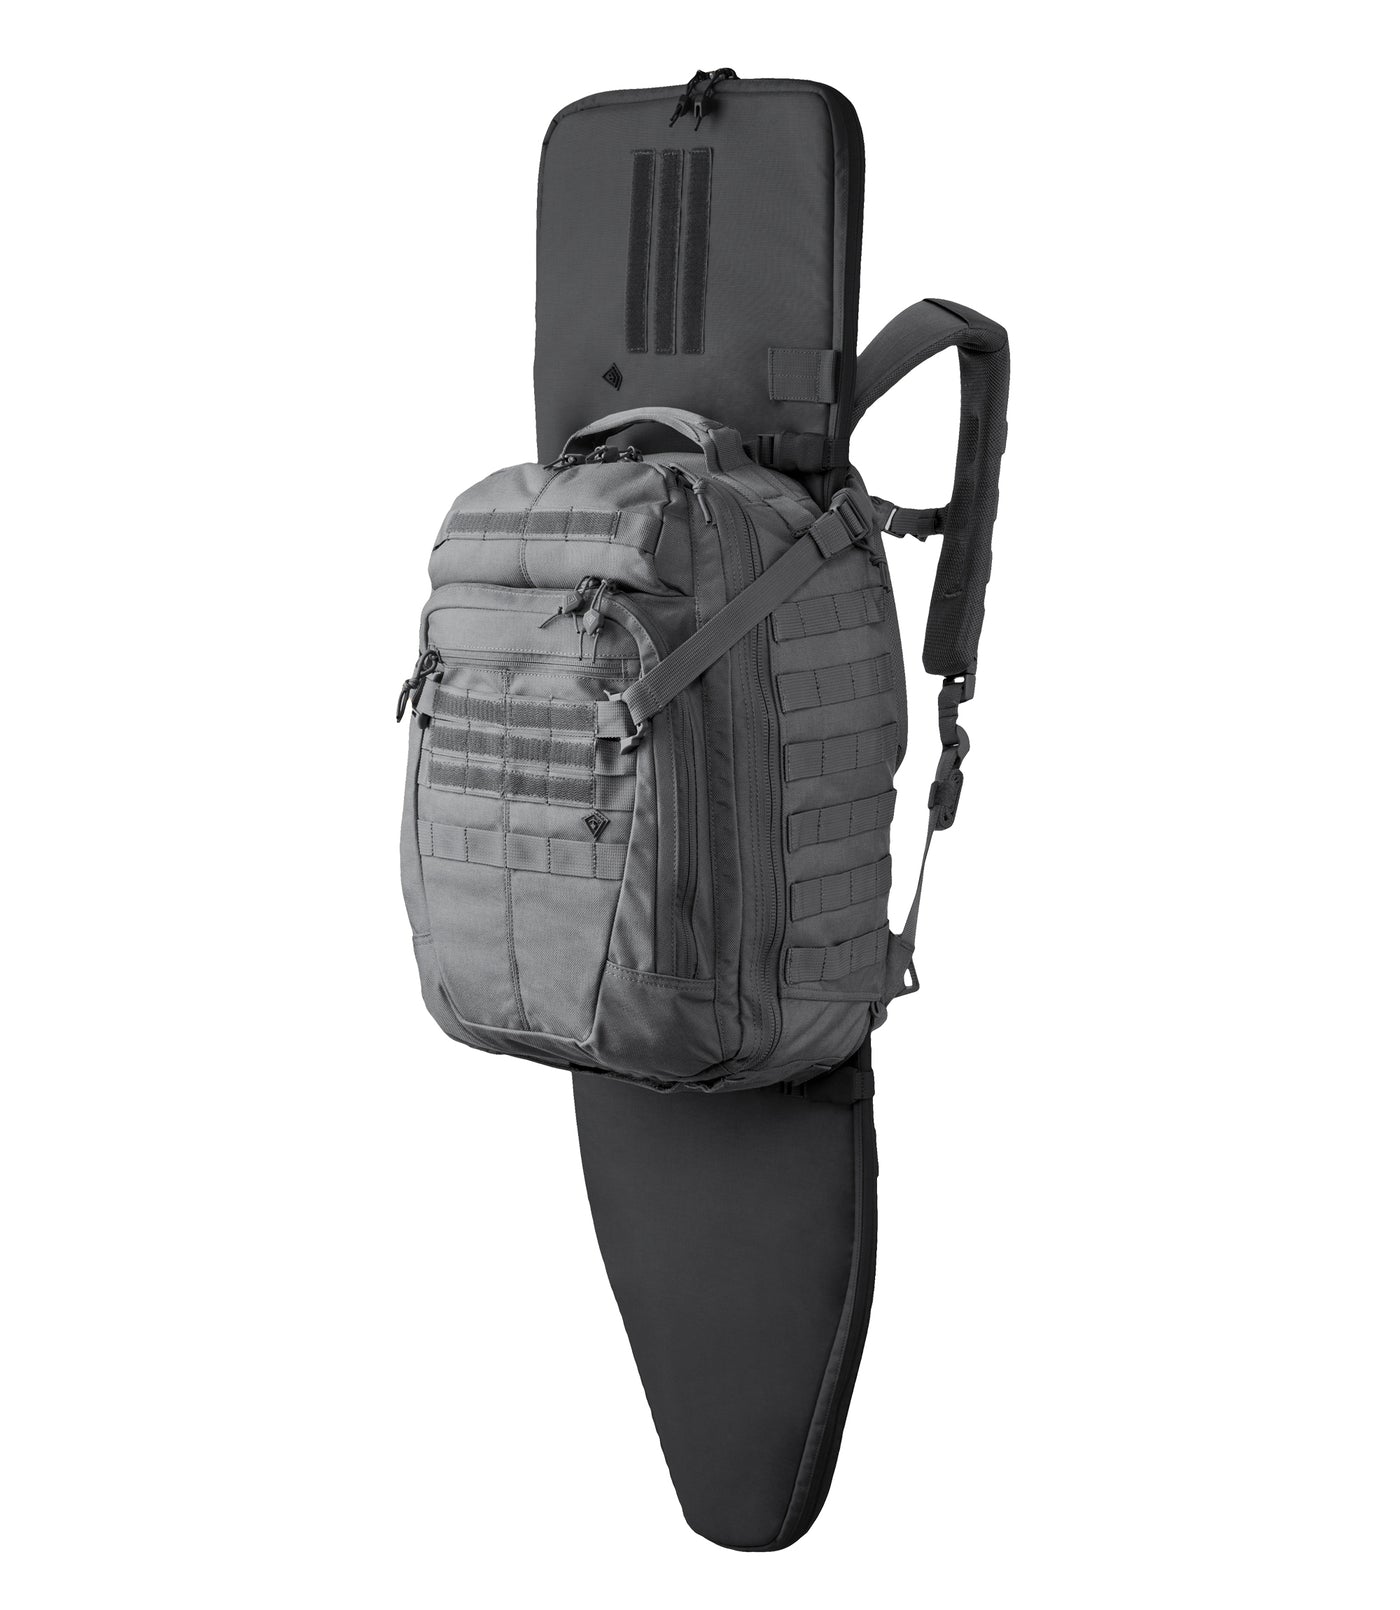 Specialist 1-Day Backpack 36L